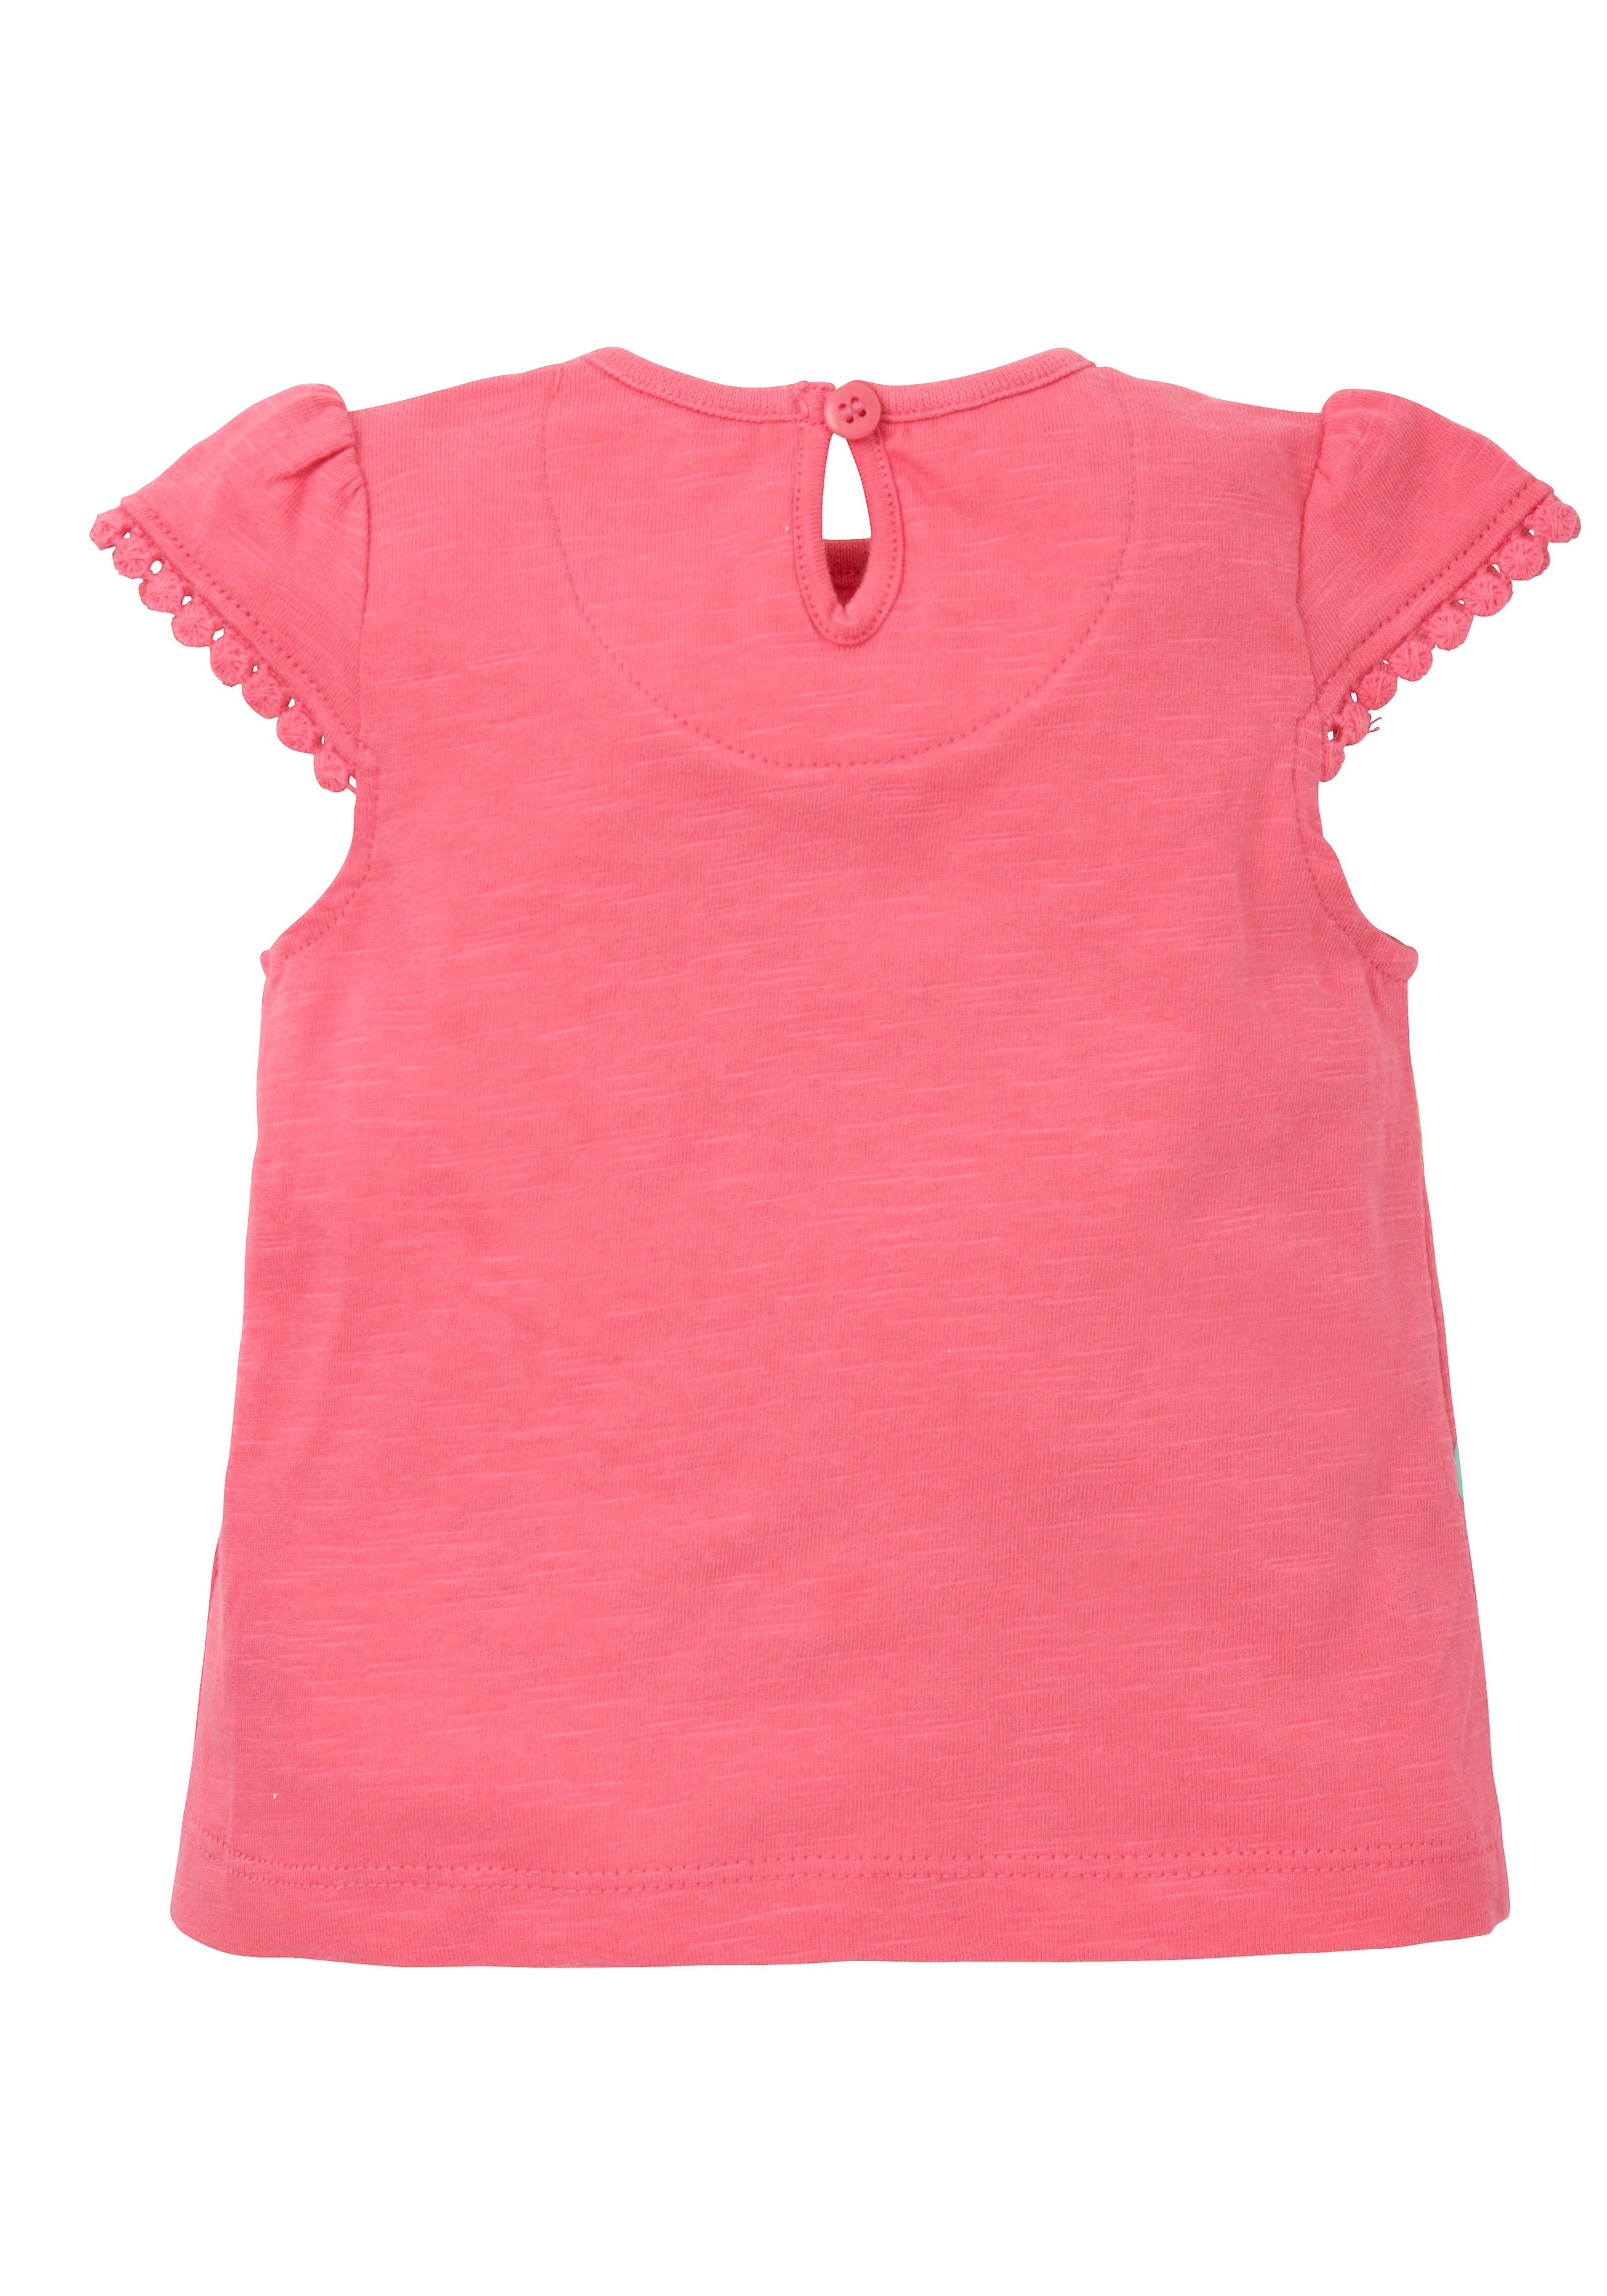 Mothercare | Girls Bright Floral Jersey T-Shirt - Pink 1